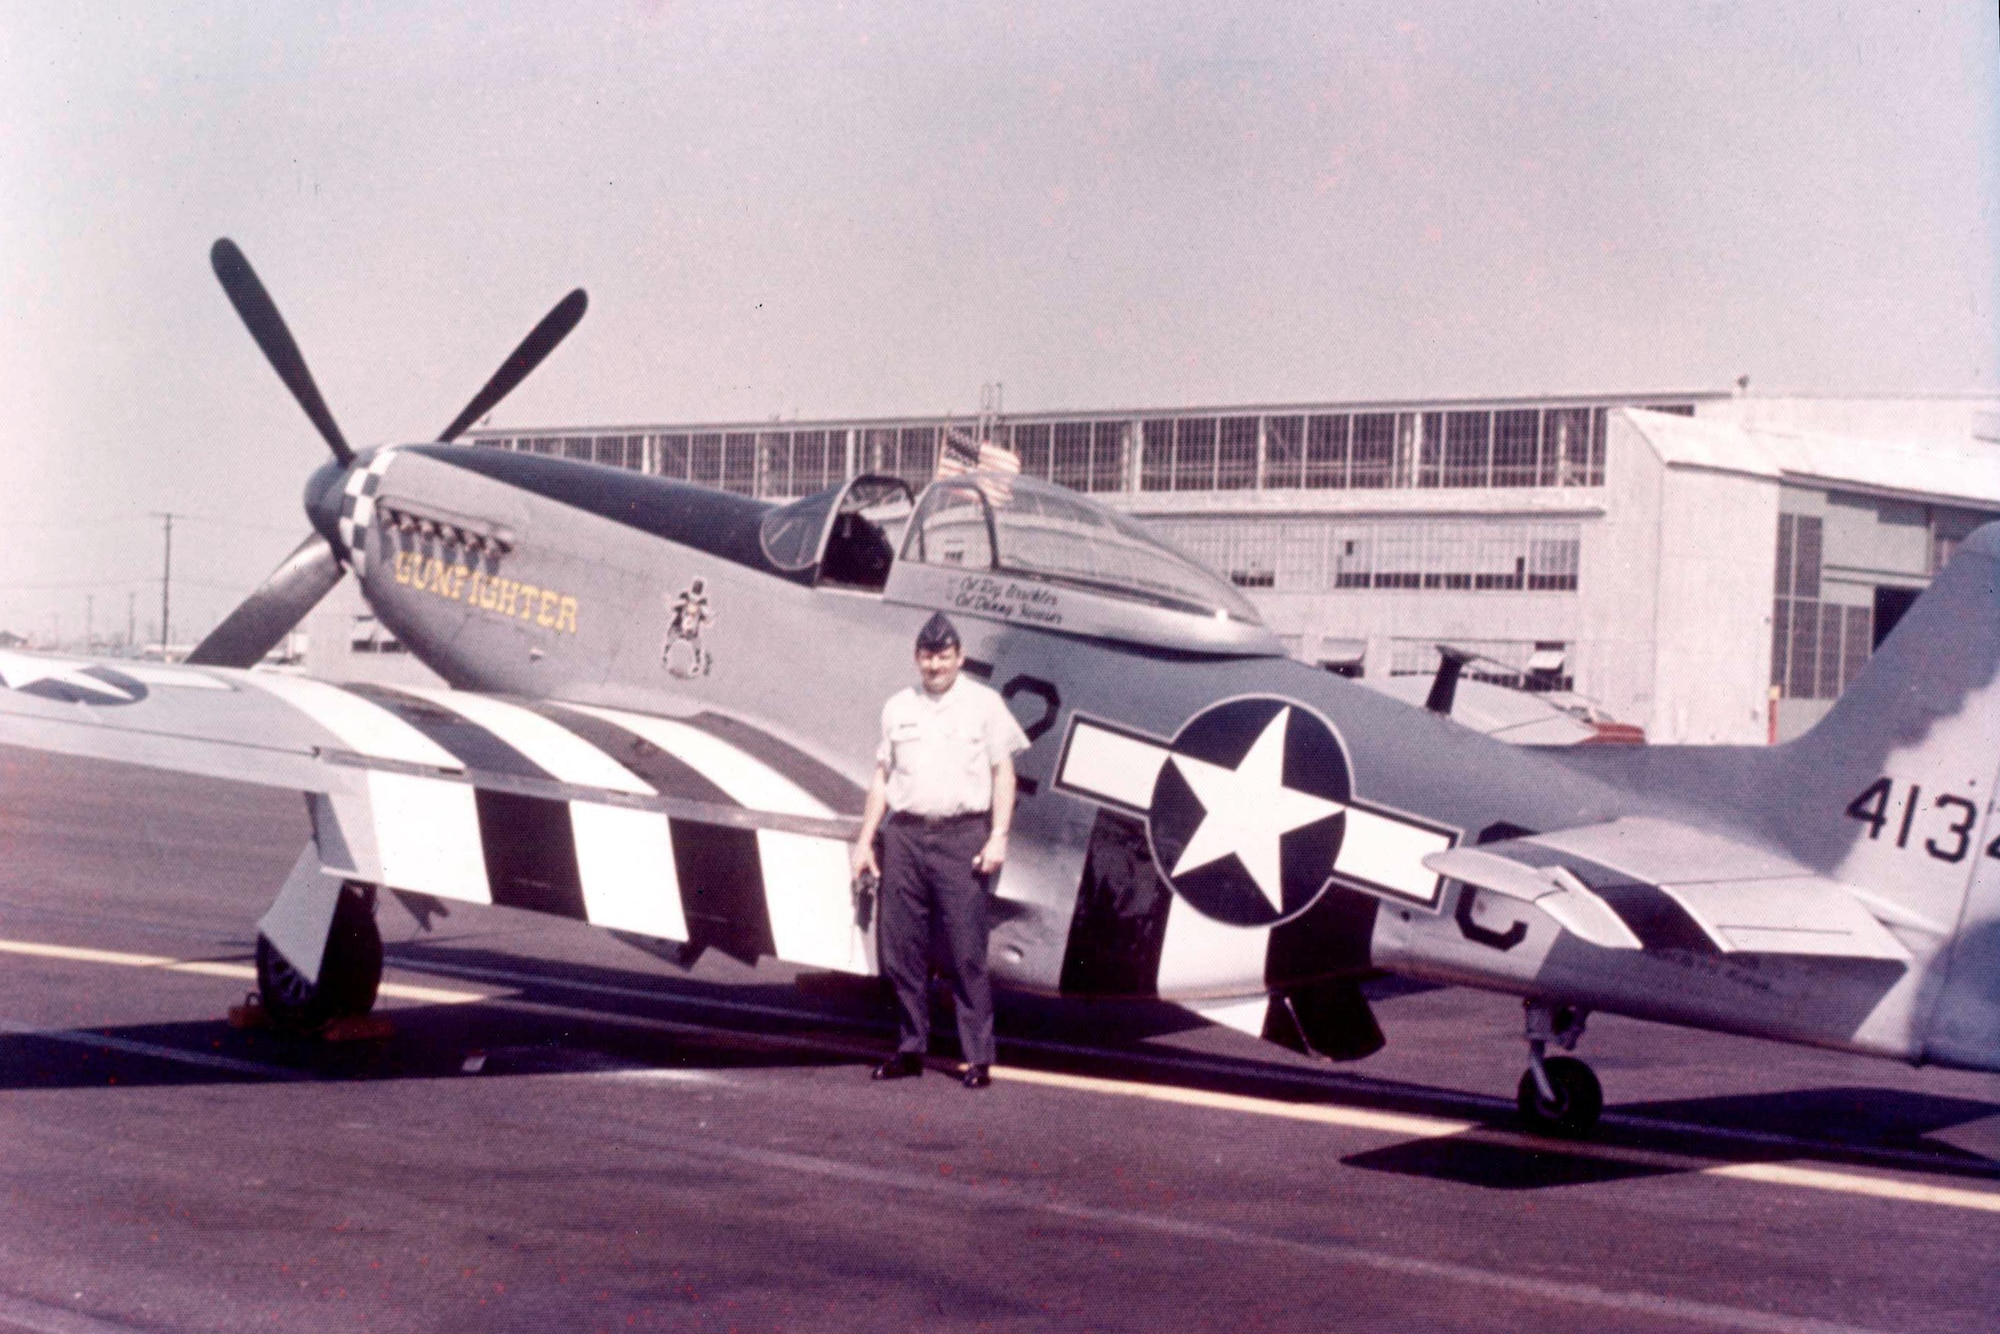 OFFUTT AIR FORCE BASE, Neb. -- Now retired U.S. Air Force Brig. Gen. Regis F.A. Urschler, former 55th Strategic Reconnaissance Wing commander, stands in front of his newly acquired P-51 Mustang in 1978. Urschler had the Mustang repainted in the 343d Fighter Squadron colors, which has evolved into the 343d Reconnaissance Squadron located here. (Courtesy Photo)